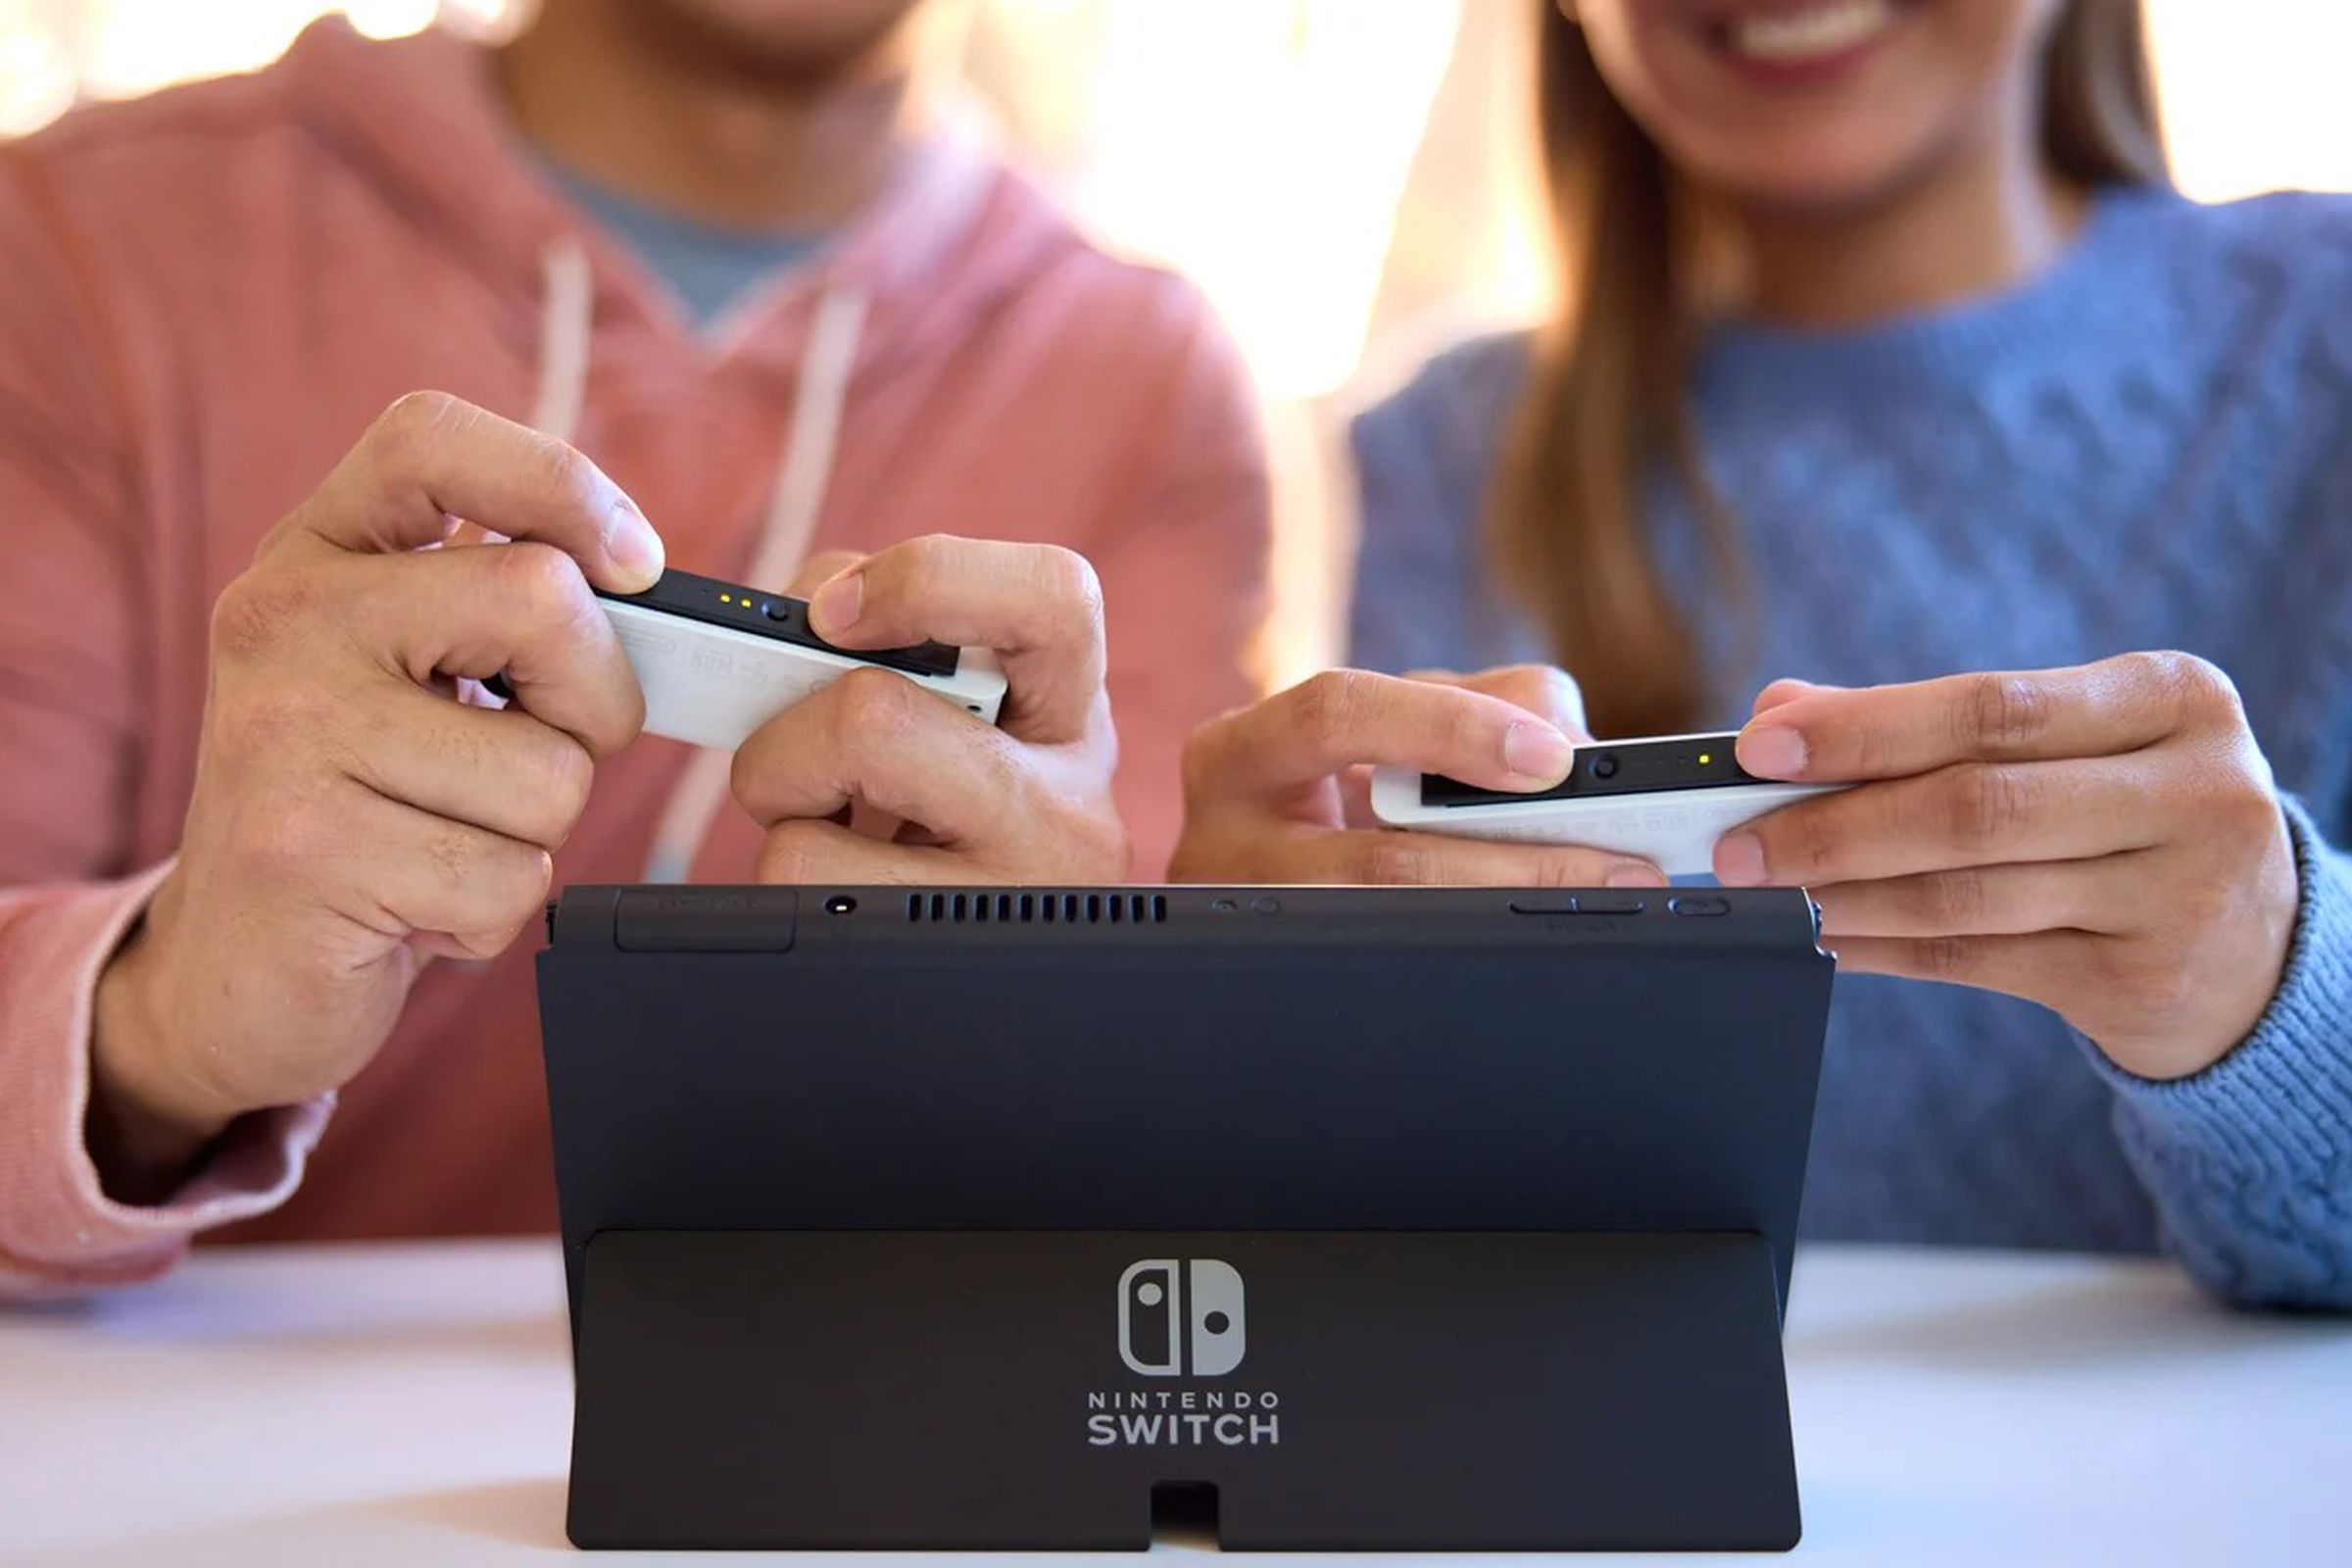 Nintendo Switch with OLED screen